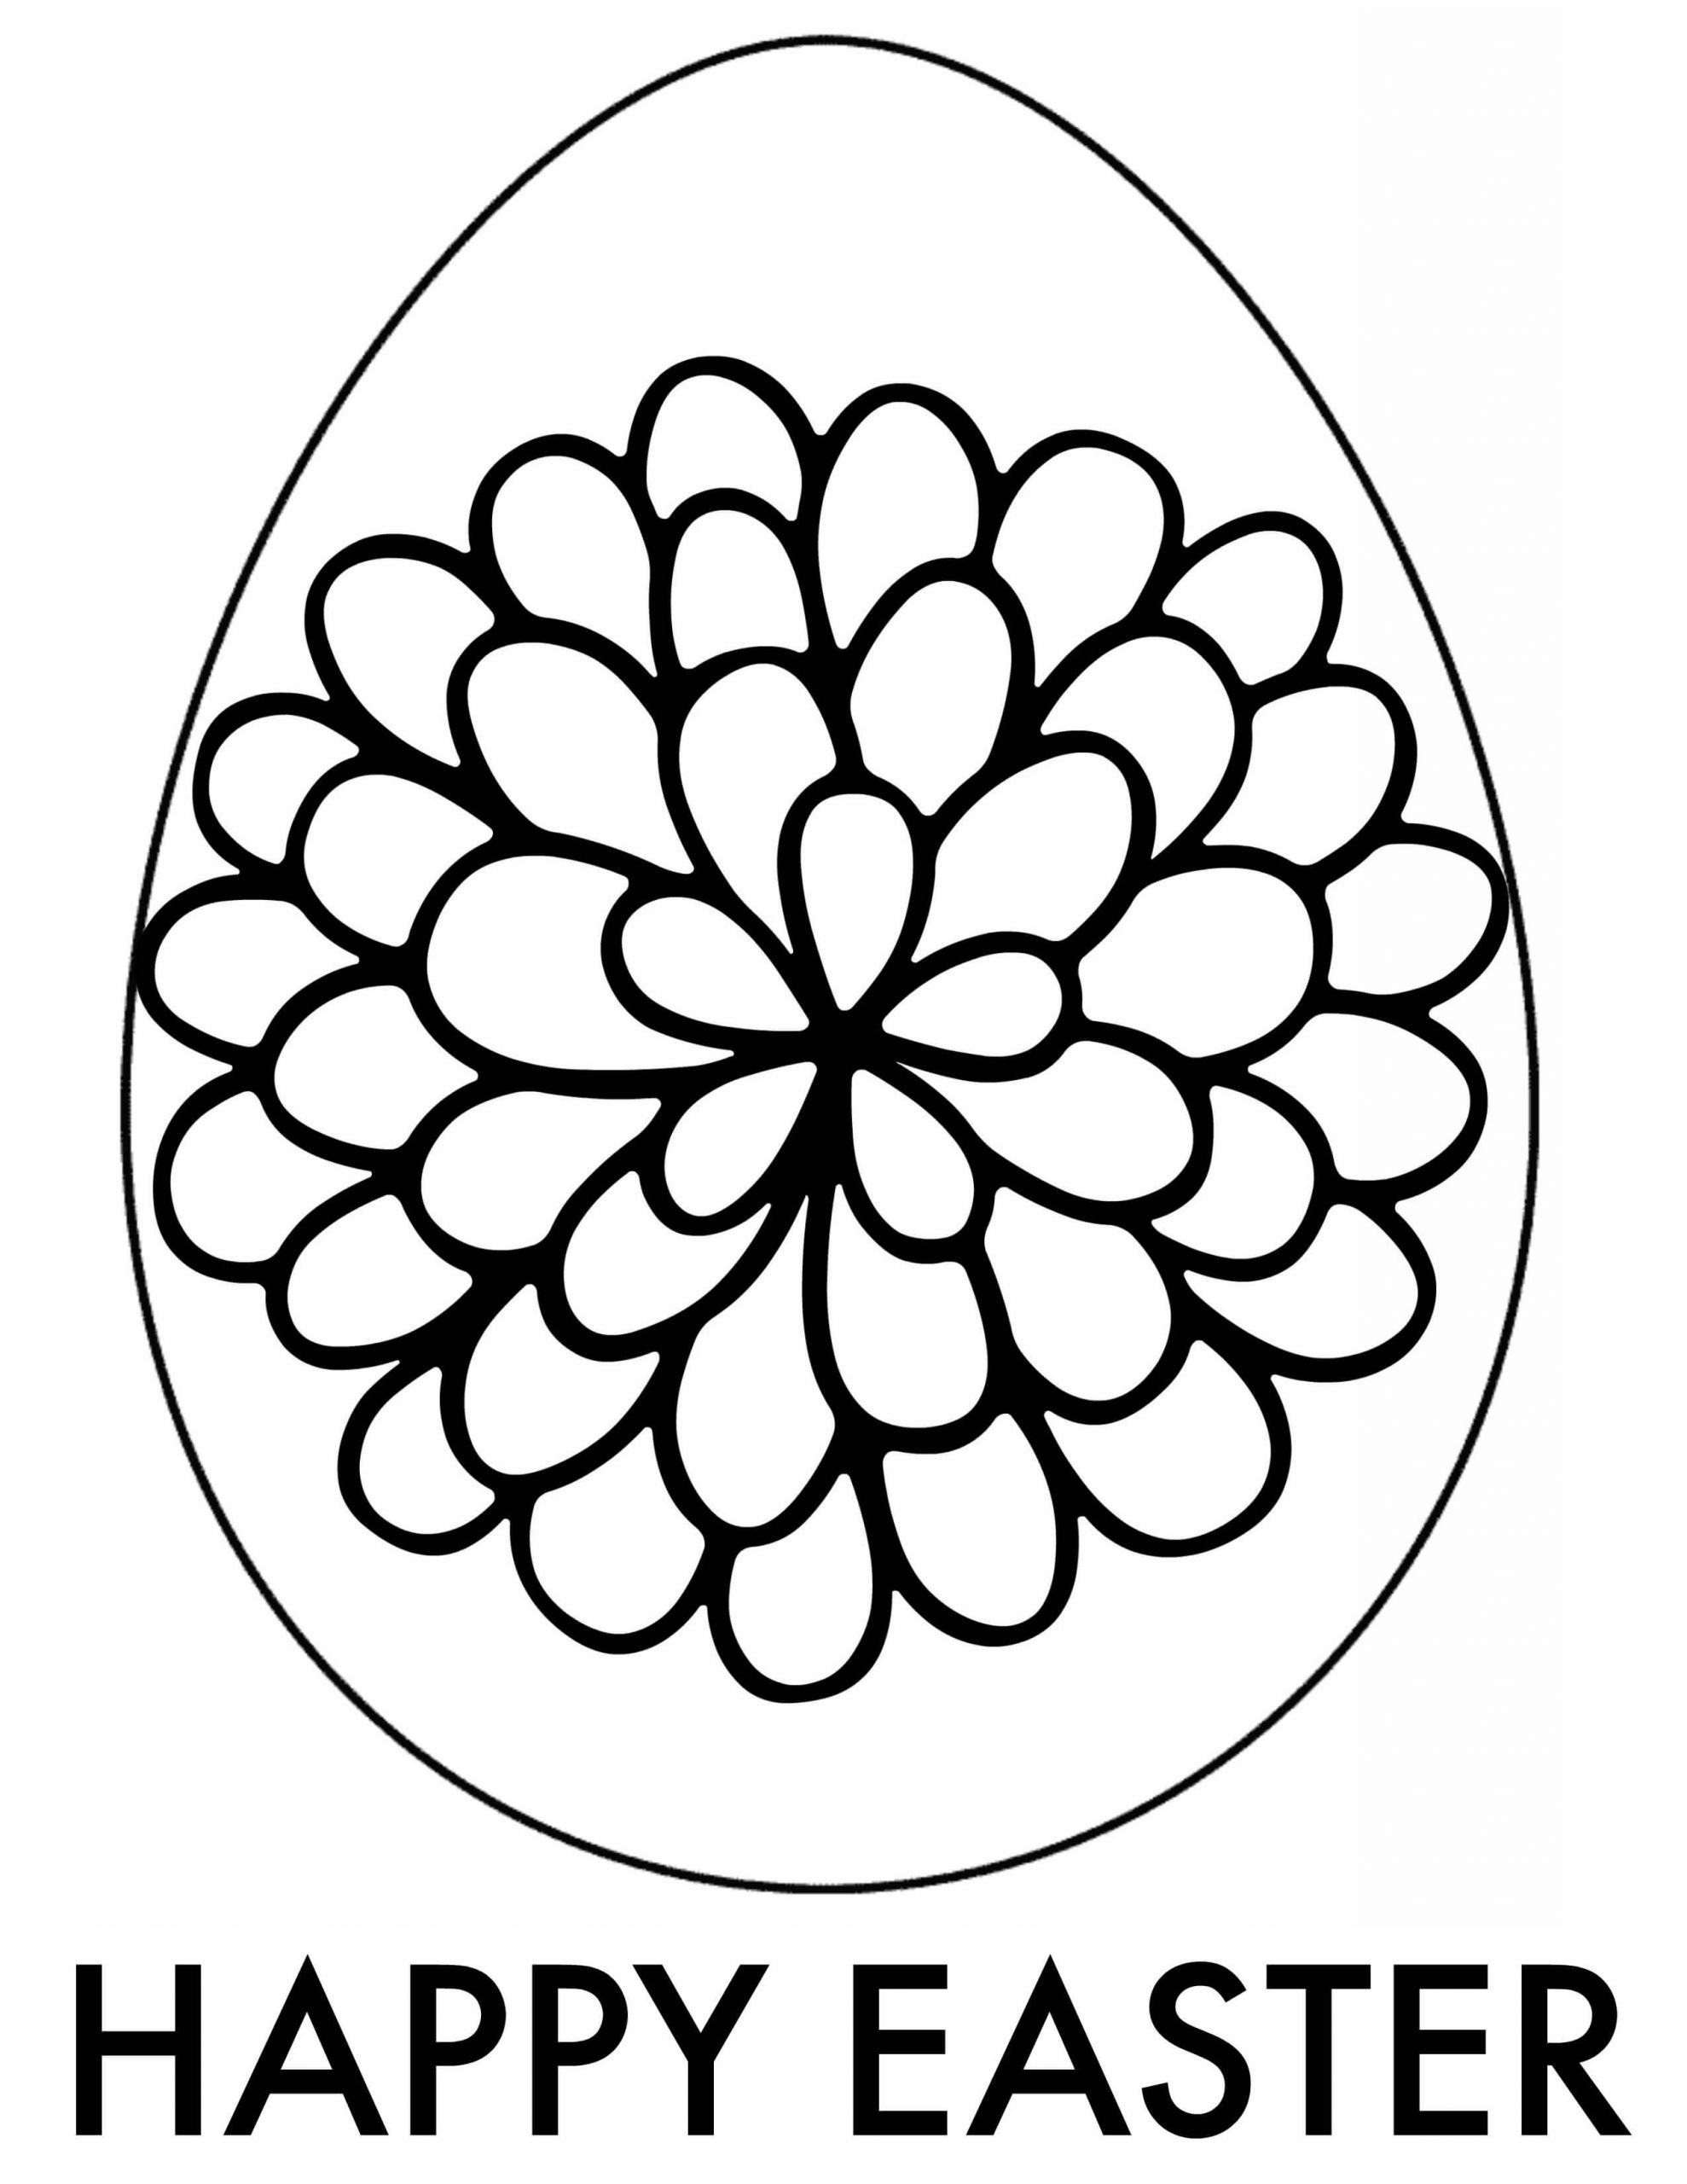 Free Printable Easter Egg Coloring Pages
 Easter Adult Coloring Pages